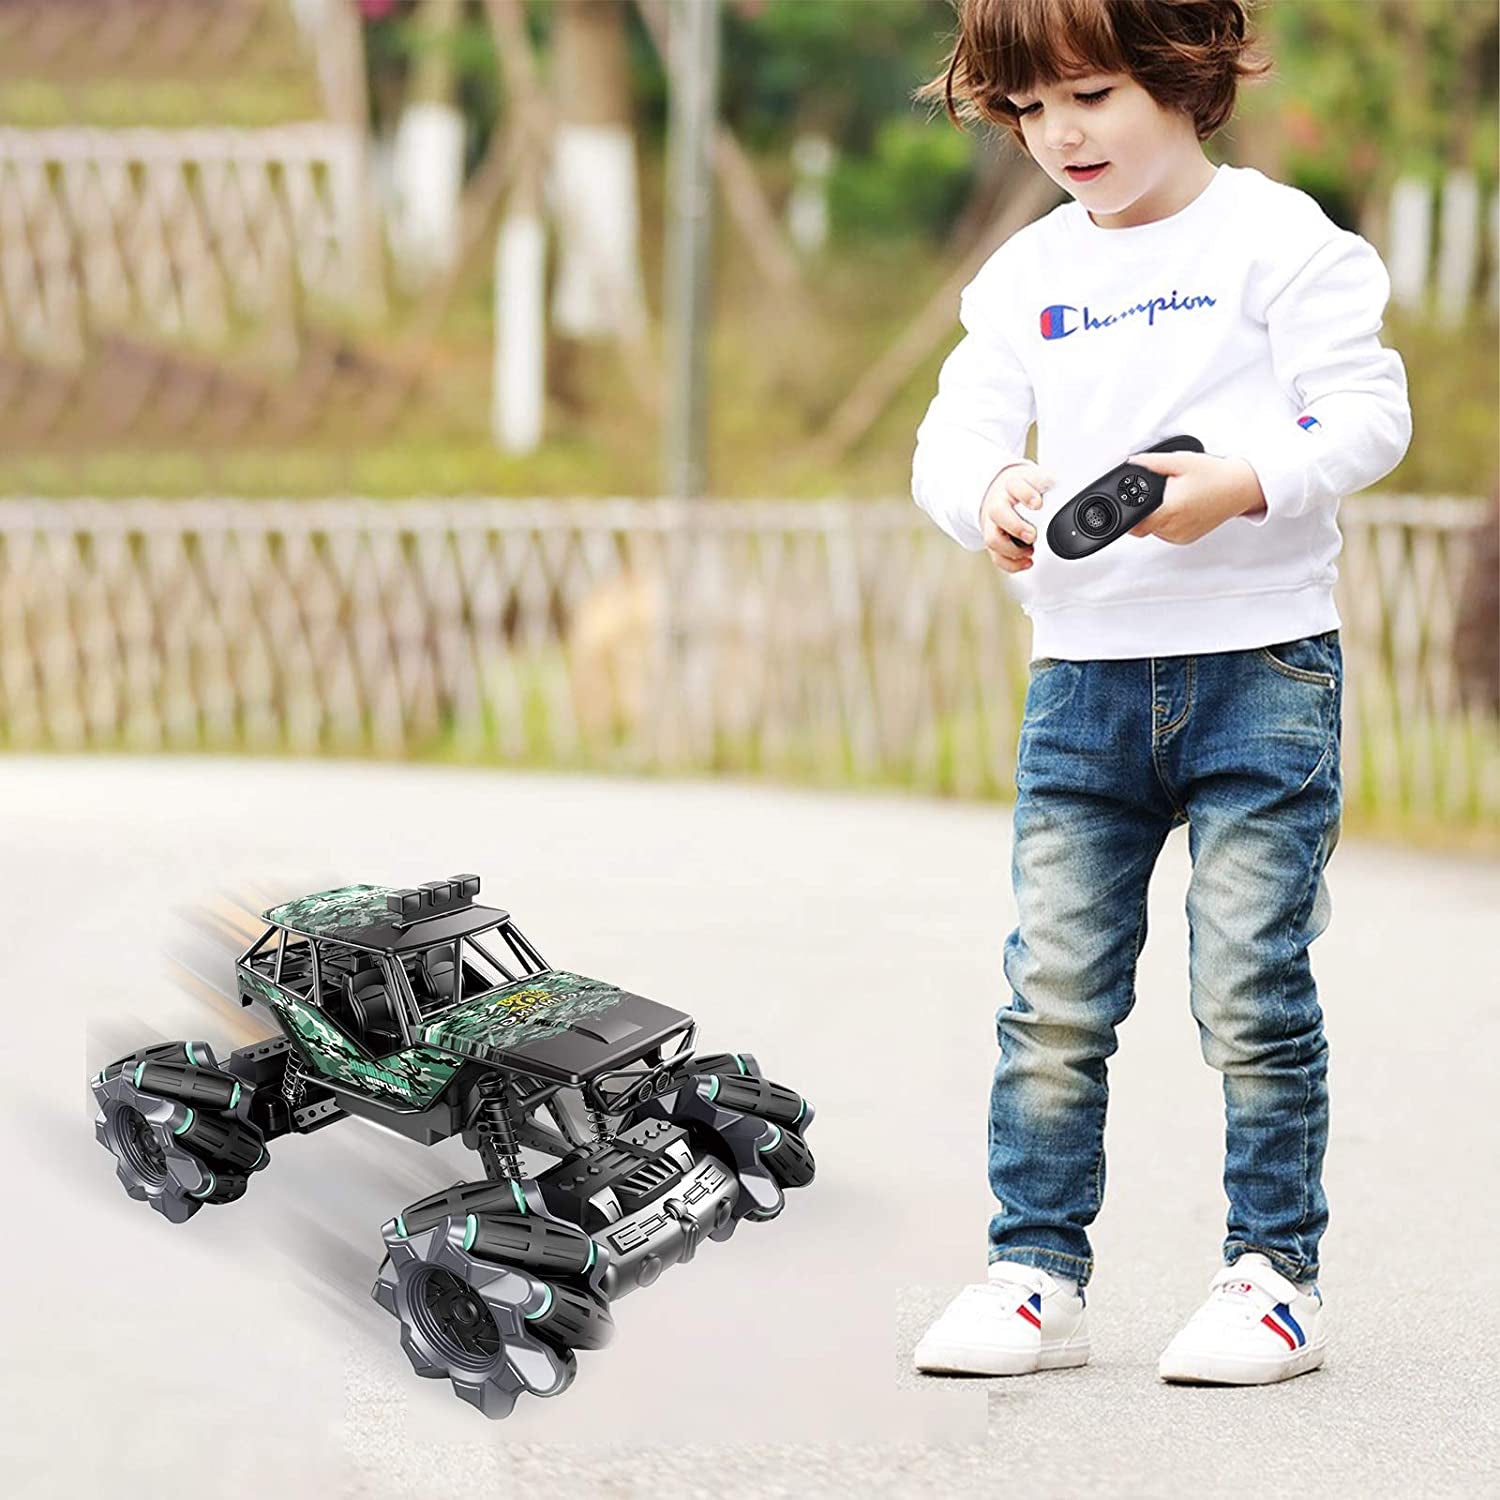 EXI Remote Control Car off Road RC Drift Car Gift for Kids Adults Birthday Christmas 360° Flips High Speed Racing Stunt Toy Car Monster Truck RC Crawler Vehicle All Terrain